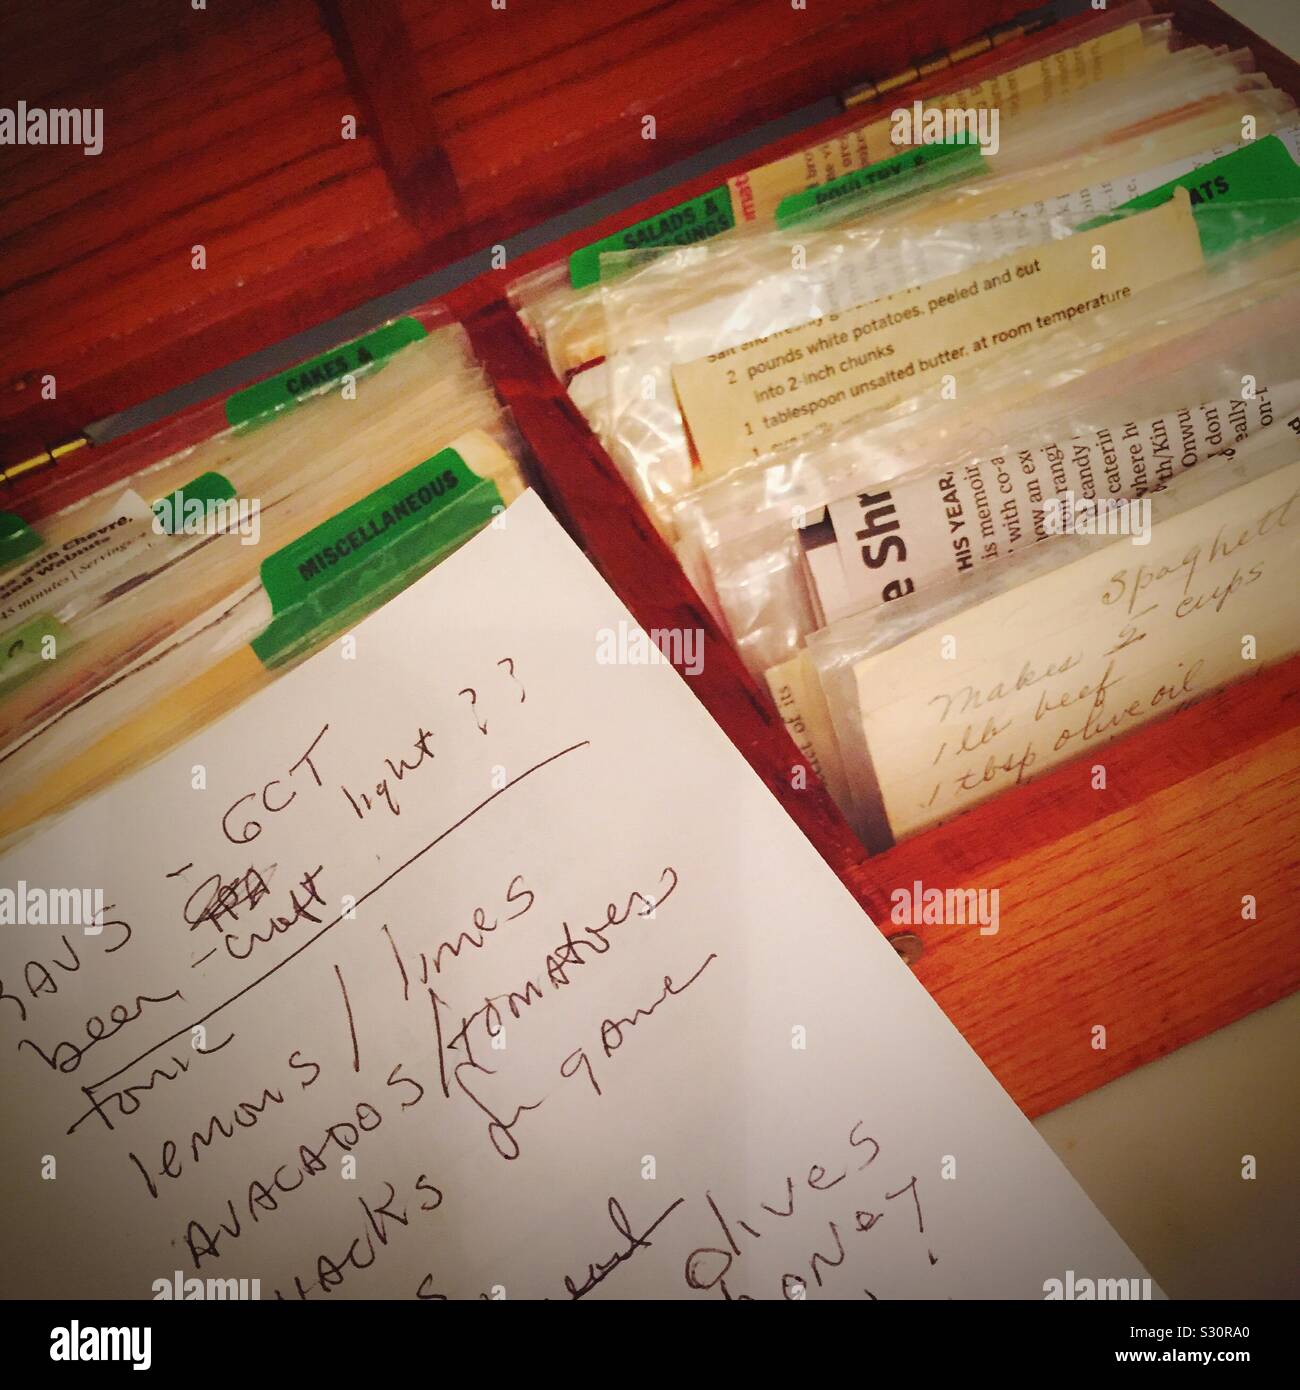 Handwritten shopping list and recipe box in a residential kitchen,USA Stock Photo